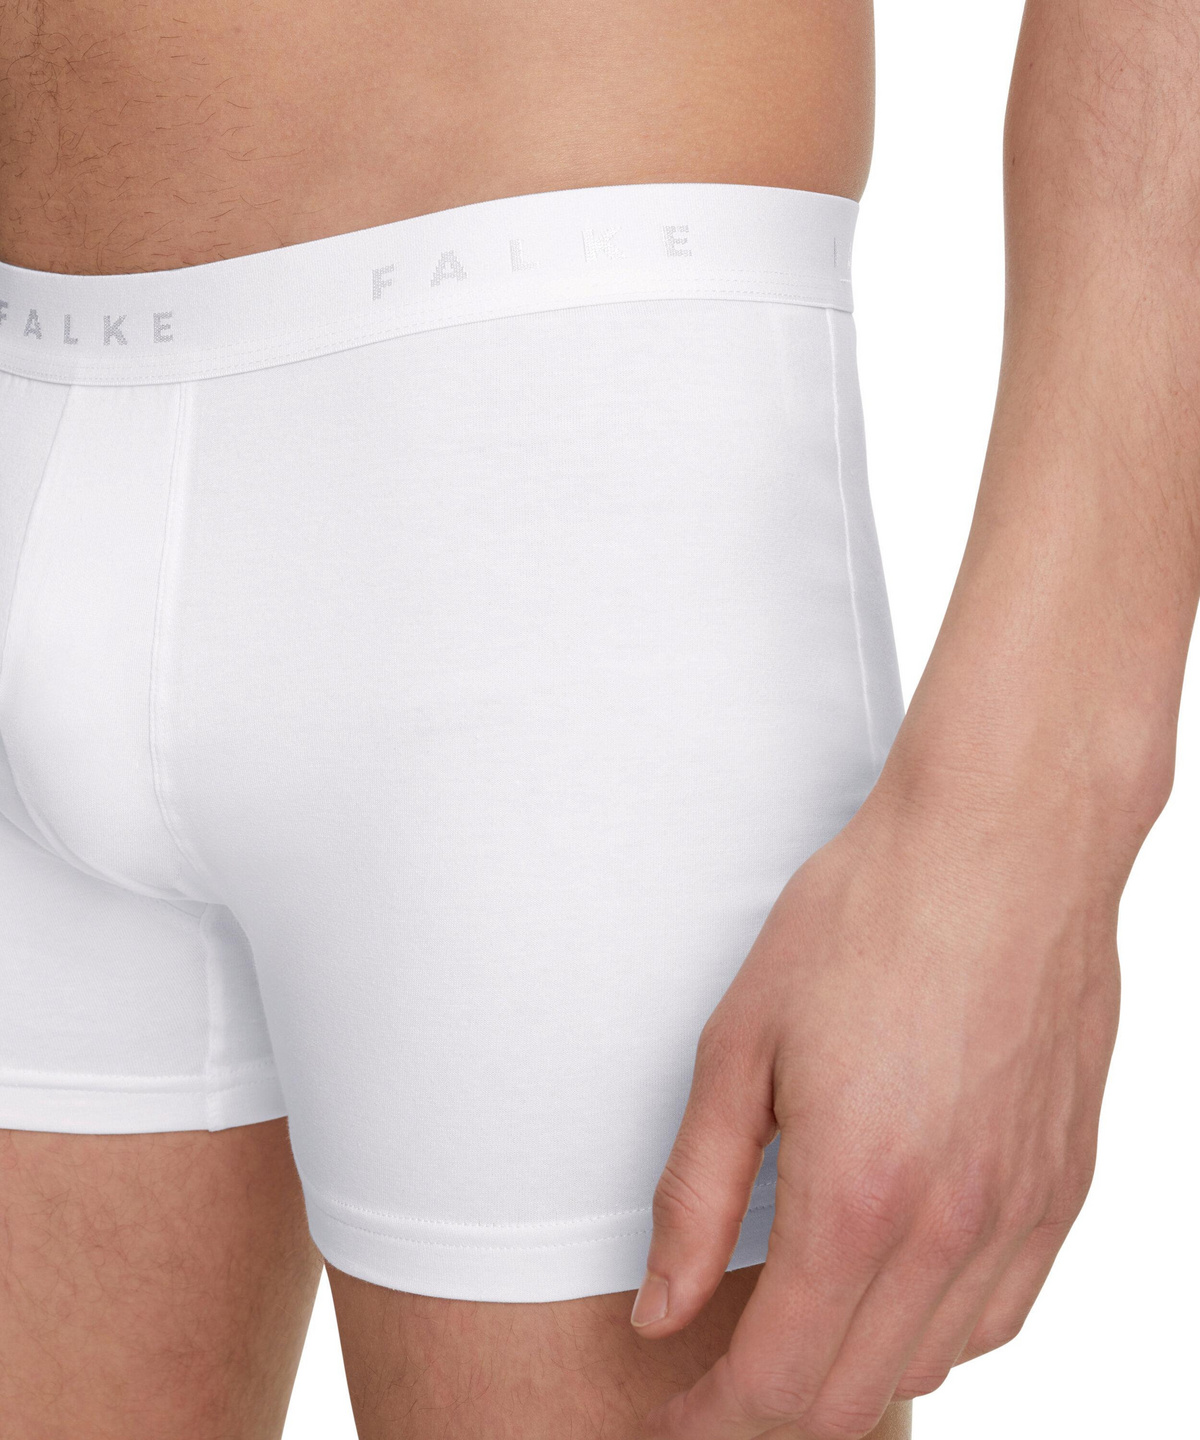 The new underwear collection Daily Comfort